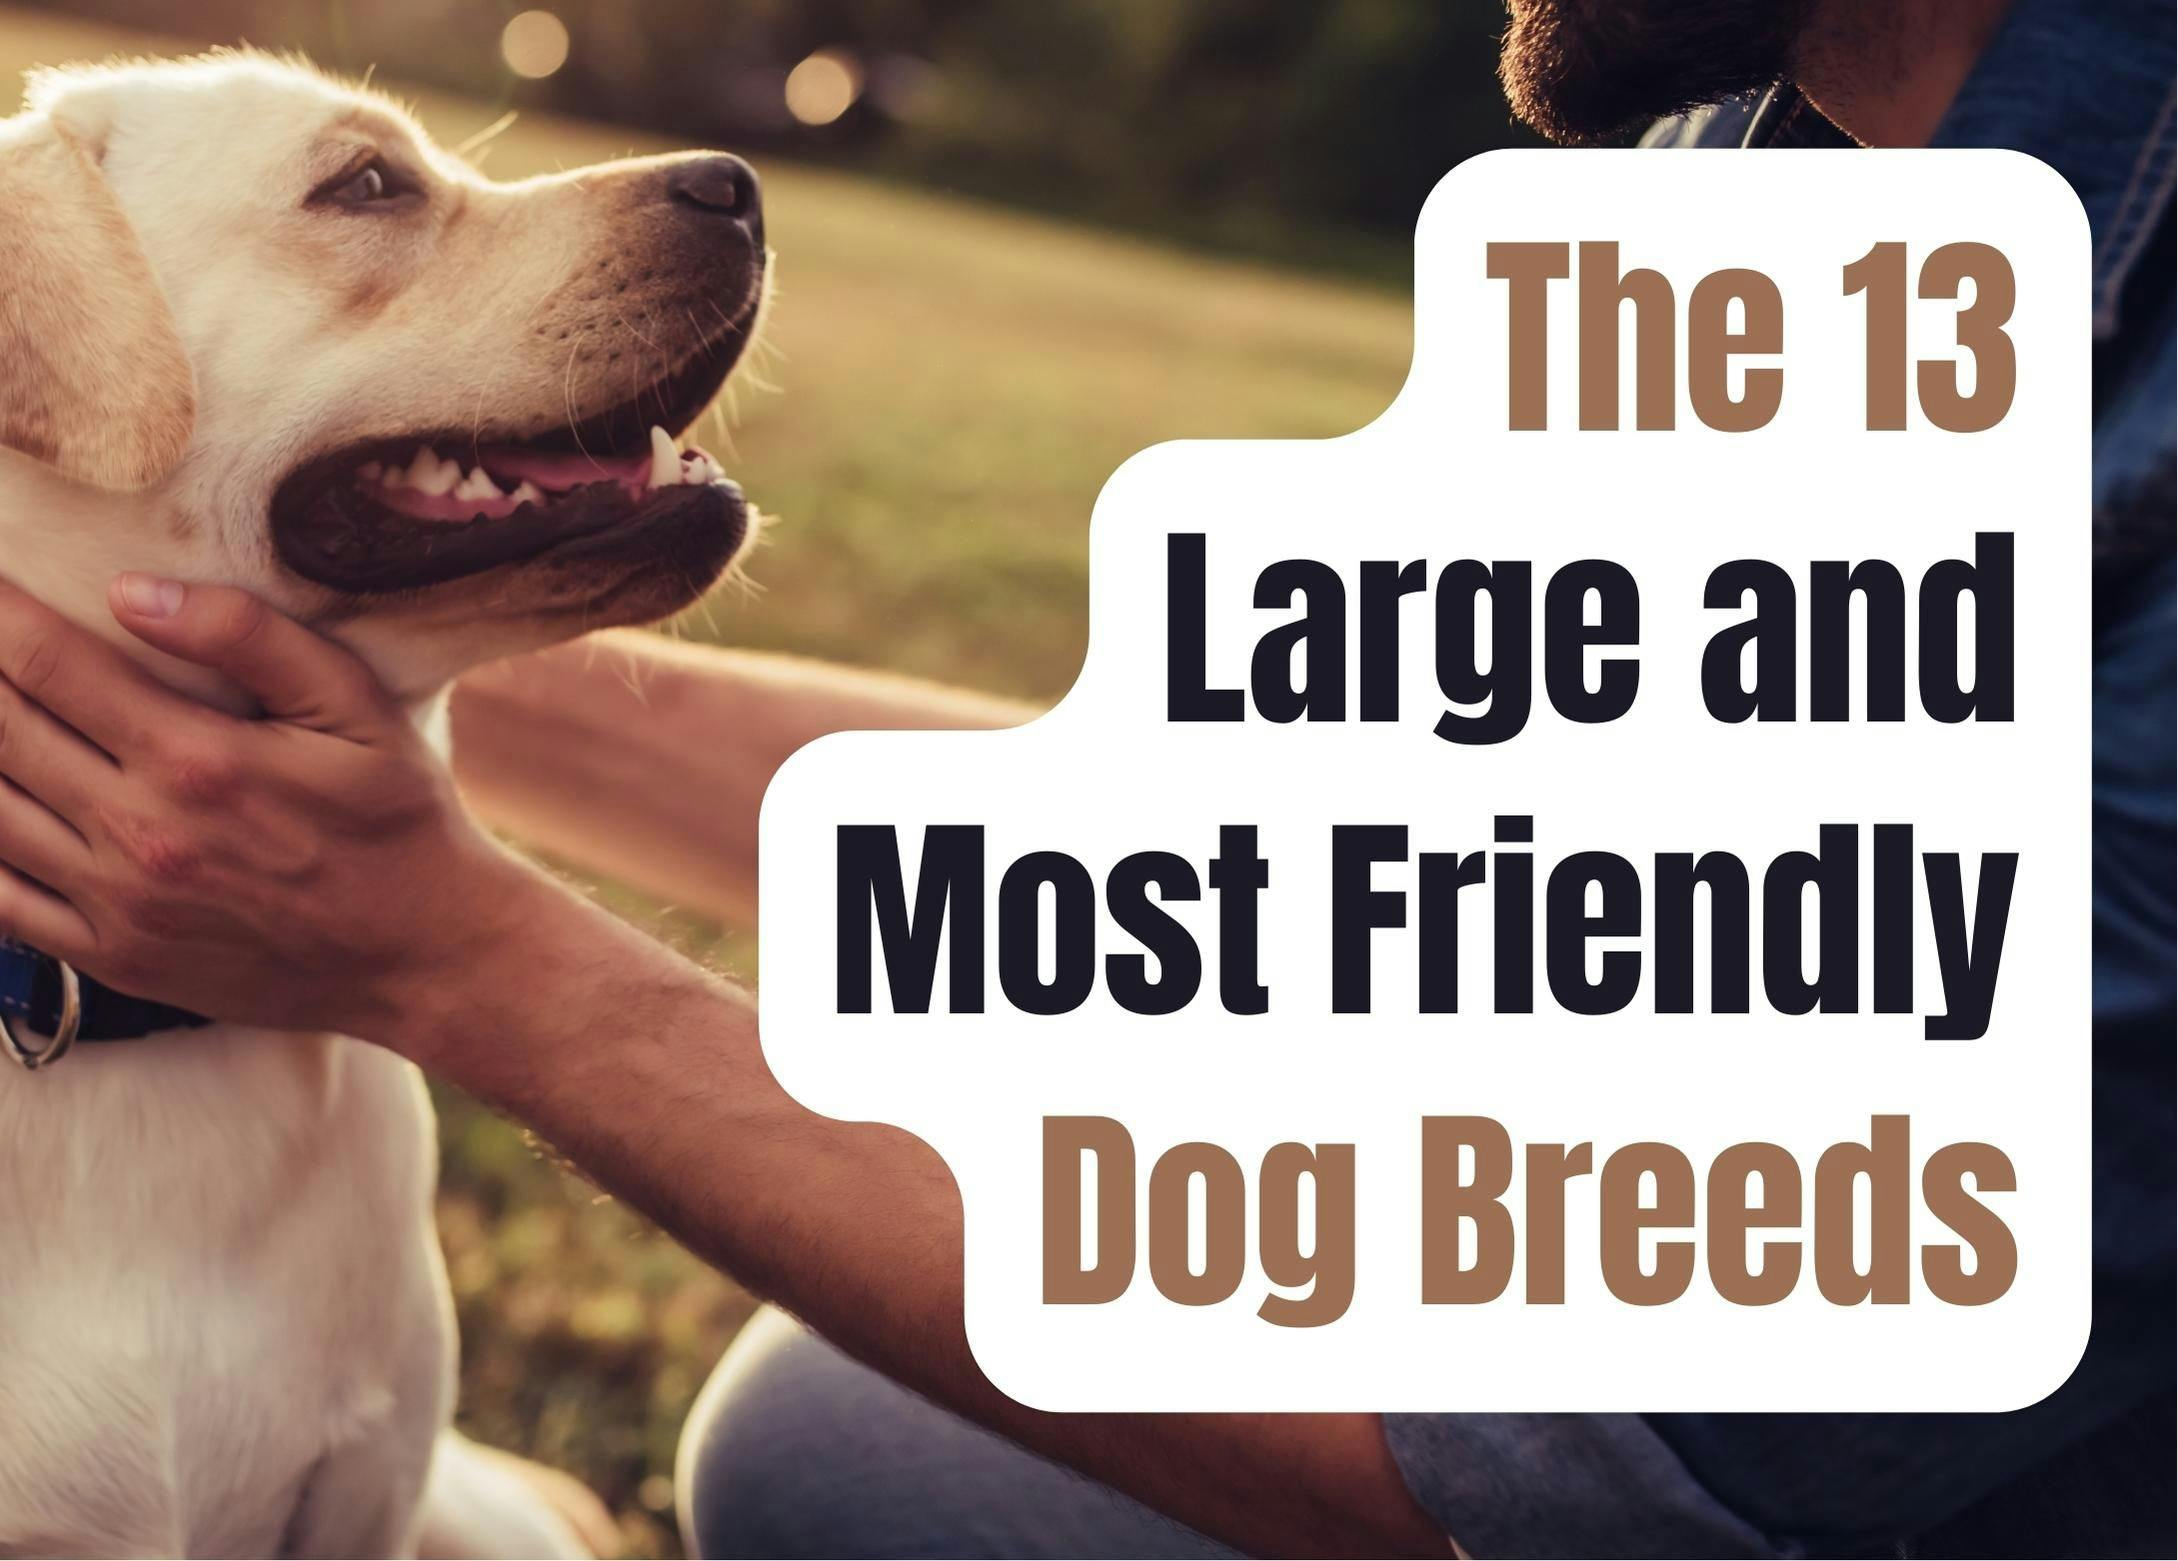 Discover 13 Gentle Giant Dog Breeds That Will Capture Your Heart